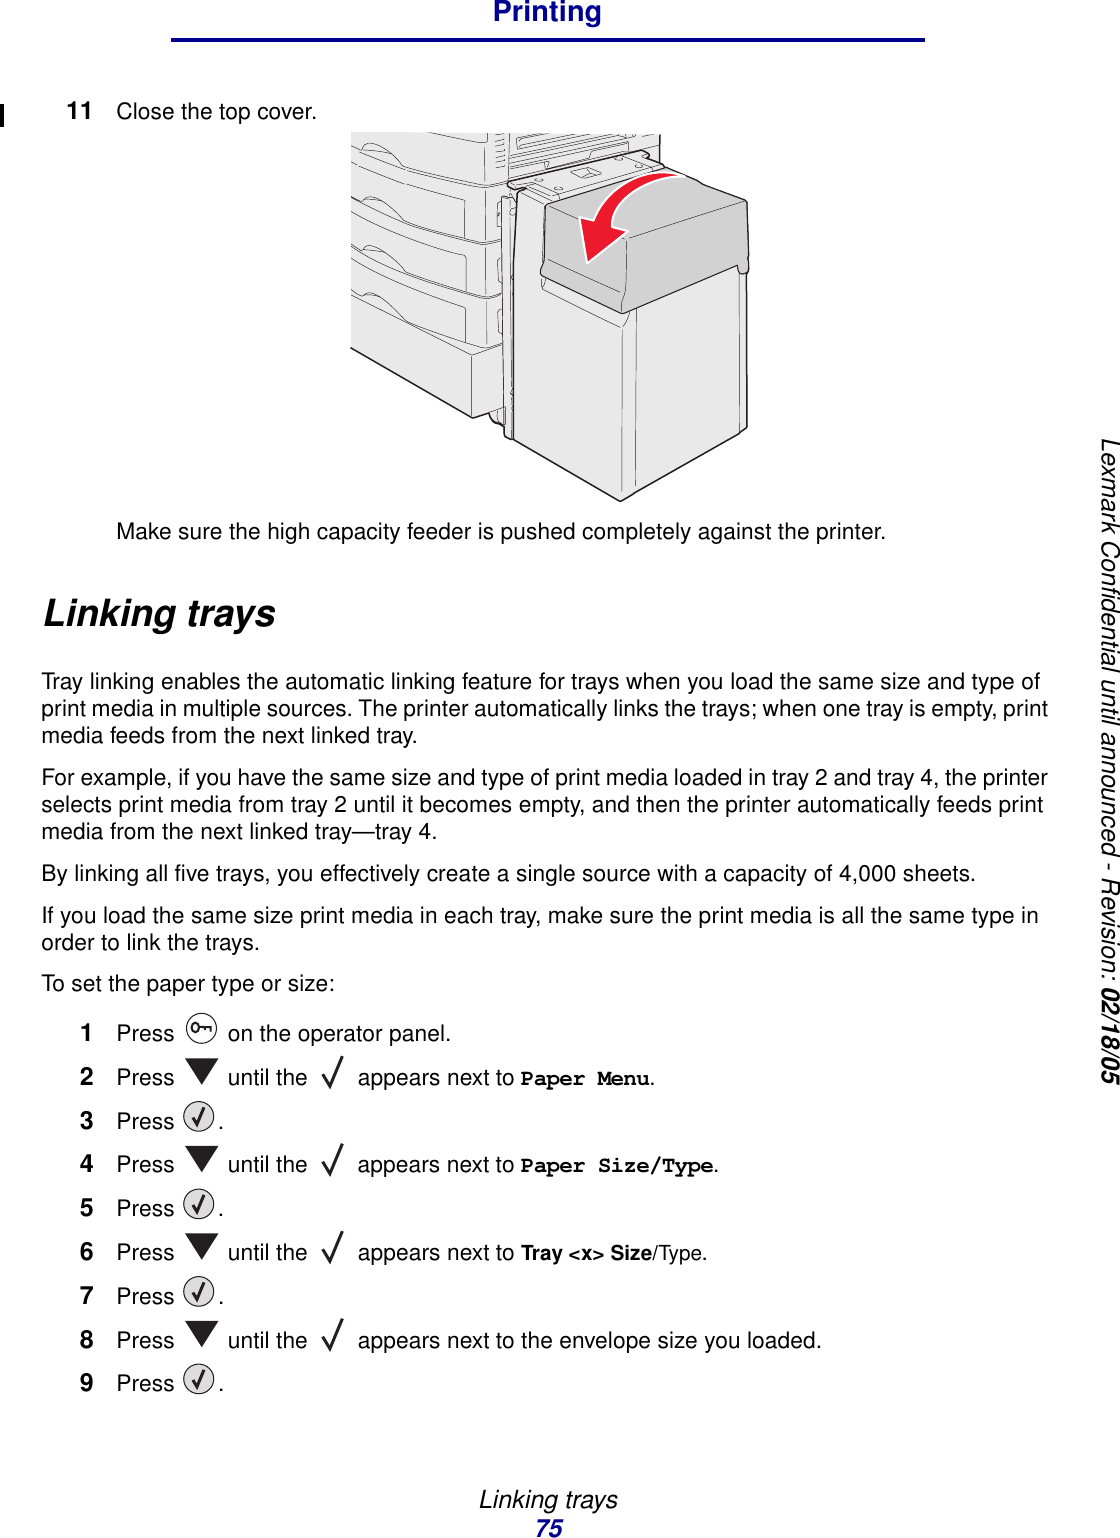 Linking trays75PrintingLexmark Confidential until announced - Revision: 02/18/0511 Close the top cover.Make sure the high capacity feeder is pushed completely against the printer.Linking traysTray linking enables the automatic linking feature for trays when you load the same size and type of print media in multiple sources. The printer automatically links the trays; when one tray is empty, print media feeds from the next linked tray.For example, if you have the same size and type of print media loaded in tray 2 and tray 4, the printer selects print media from tray 2 until it becomes empty, and then the printer automatically feeds print media from the next linked tray—tray 4.By linking all five trays, you effectively create a single source with a capacity of 4,000 sheets.If you load the same size print media in each tray, make sure the print media is all the same type in order to link the trays. To set the paper type or size:1Press   on the operator panel.2Press   until the   appears next to Paper Menu.3Press .4Press   until the   appears next to Paper Size/Type.5Press .6Press   until the   appears next to Tray &lt;x&gt; Size/Type.7Press .8Press   until the   appears next to the envelope size you loaded.9Press .